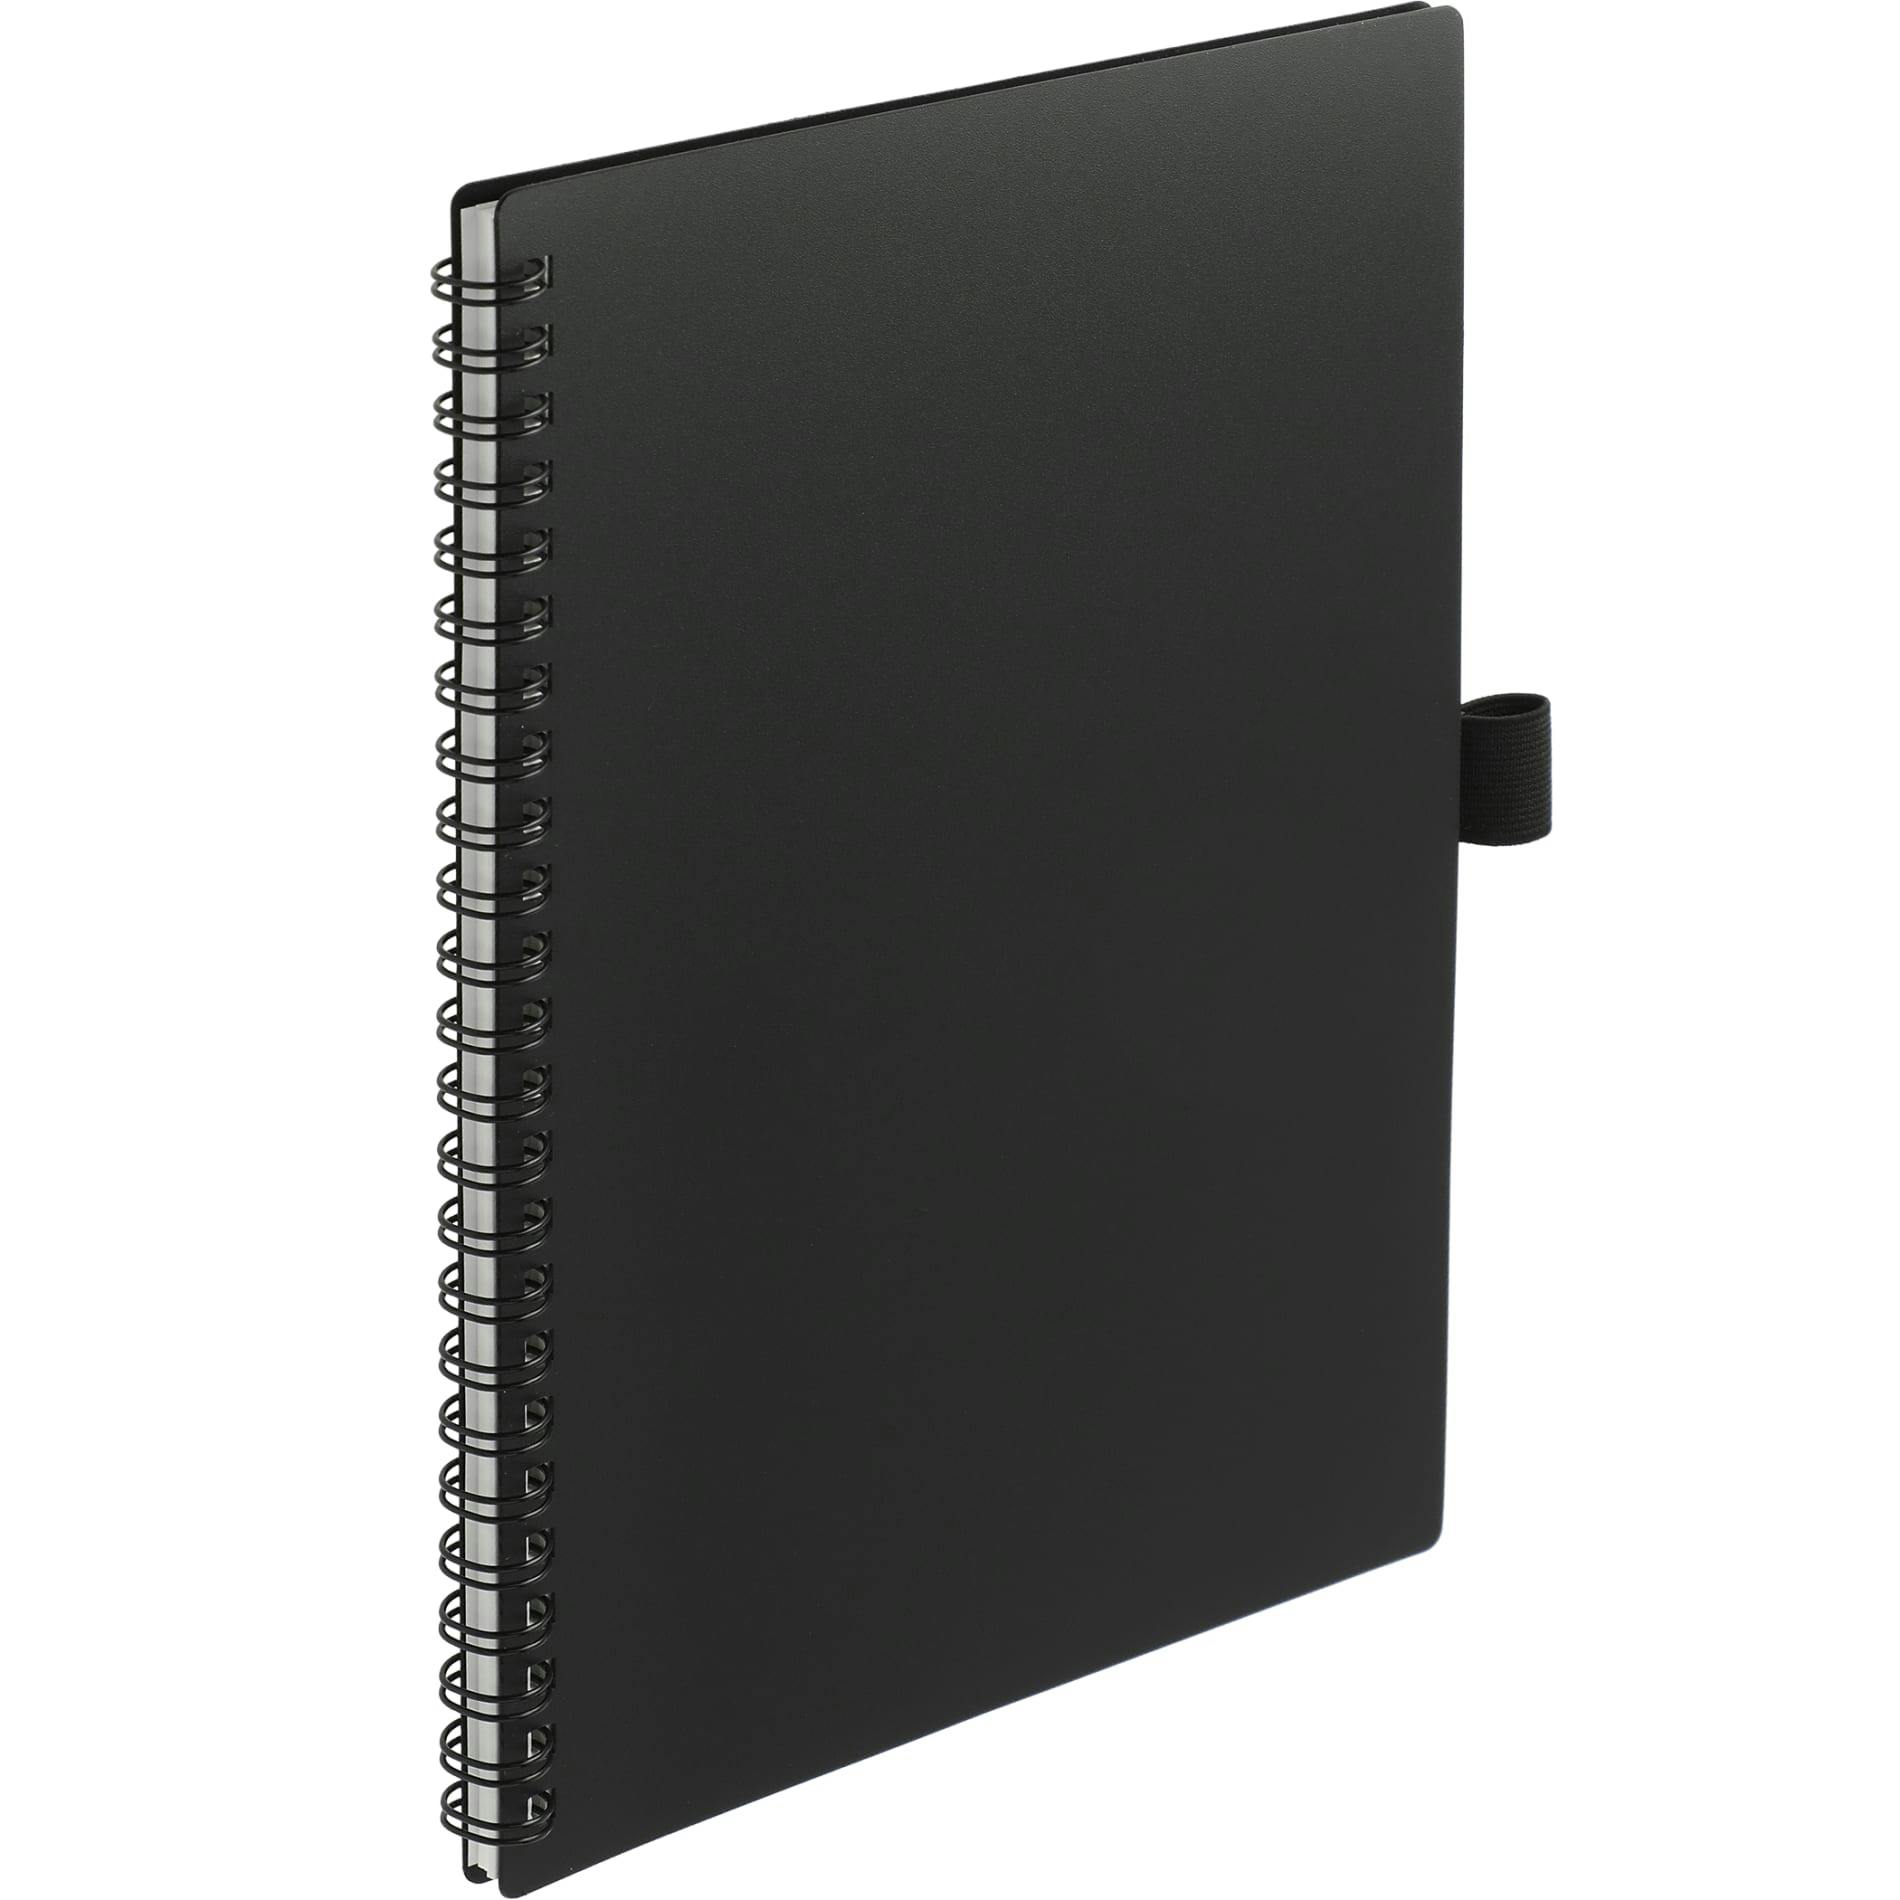 5.7" x 8.5" FUNCTION Erasable Notebook - additional Image 3